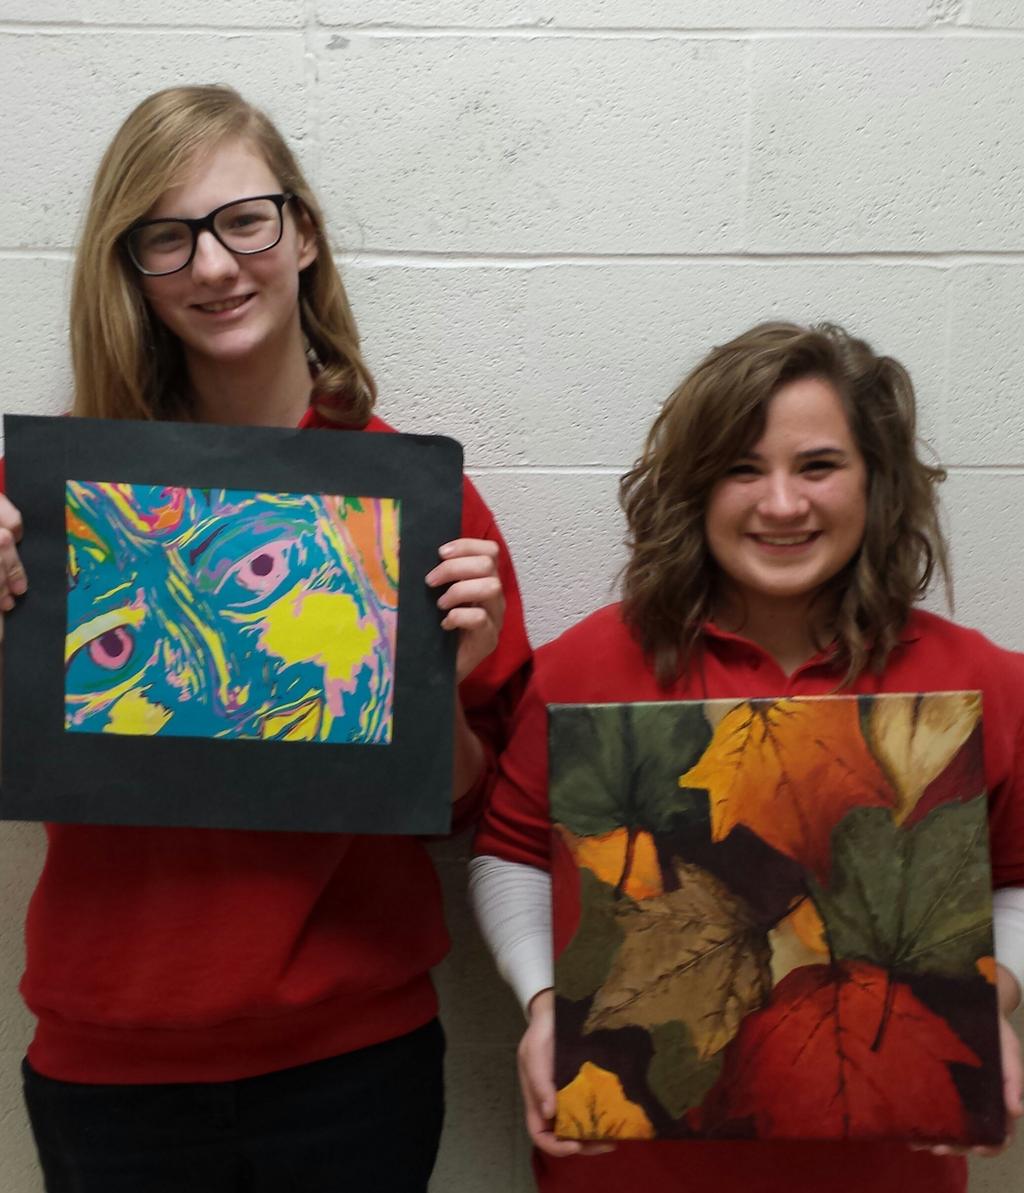 Congratulations to seniors, Faith Chmelka and Therese Chohon, on both winning Honorable Mention for their artwork at the Scholastic Art Contest!